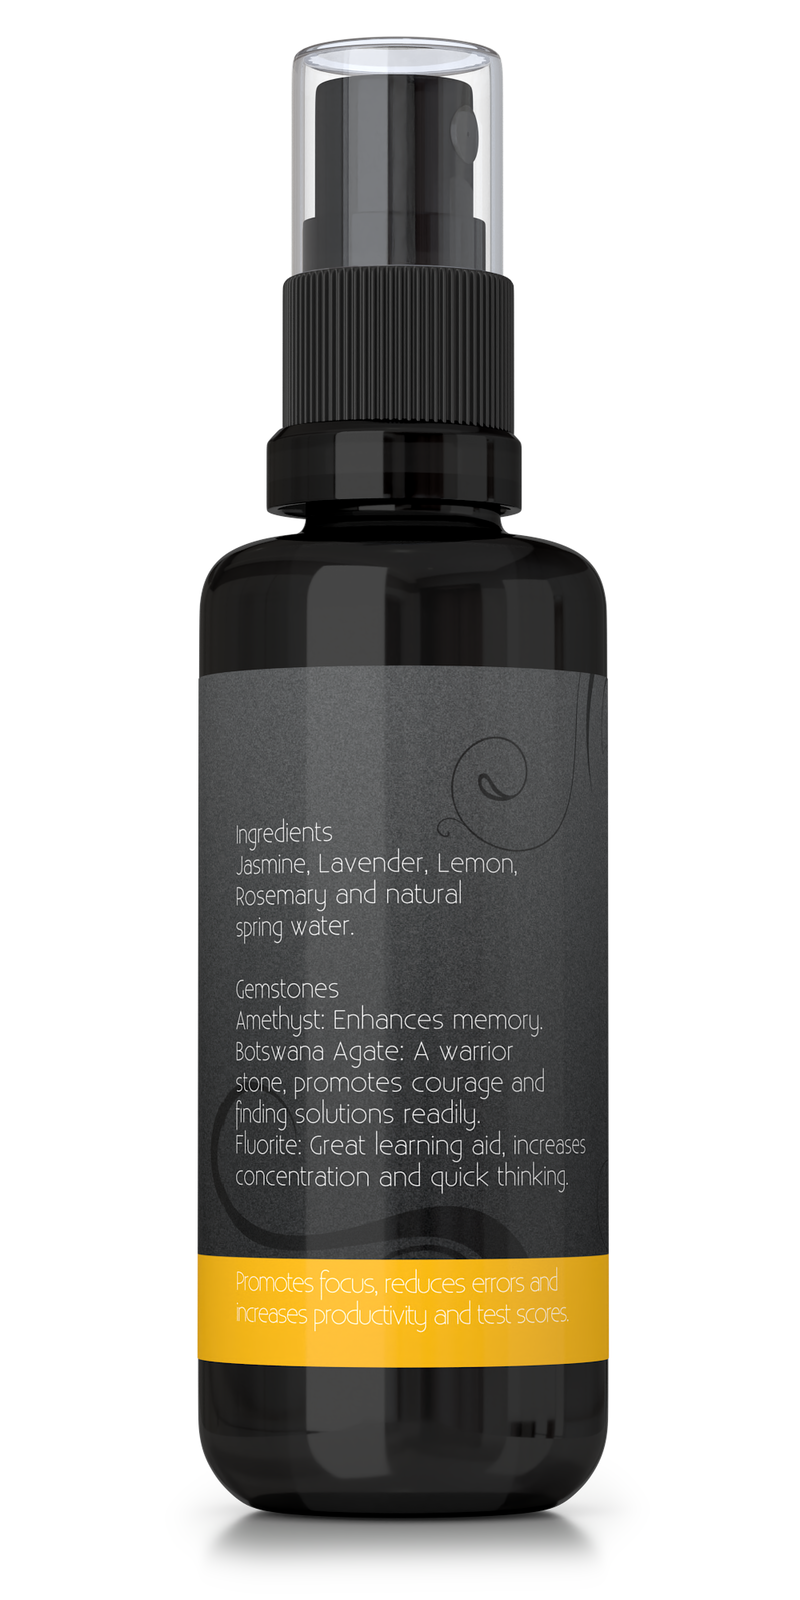 Focus aromatherapy spray with essential oils and gemstones, backside of bottle showing ingredients